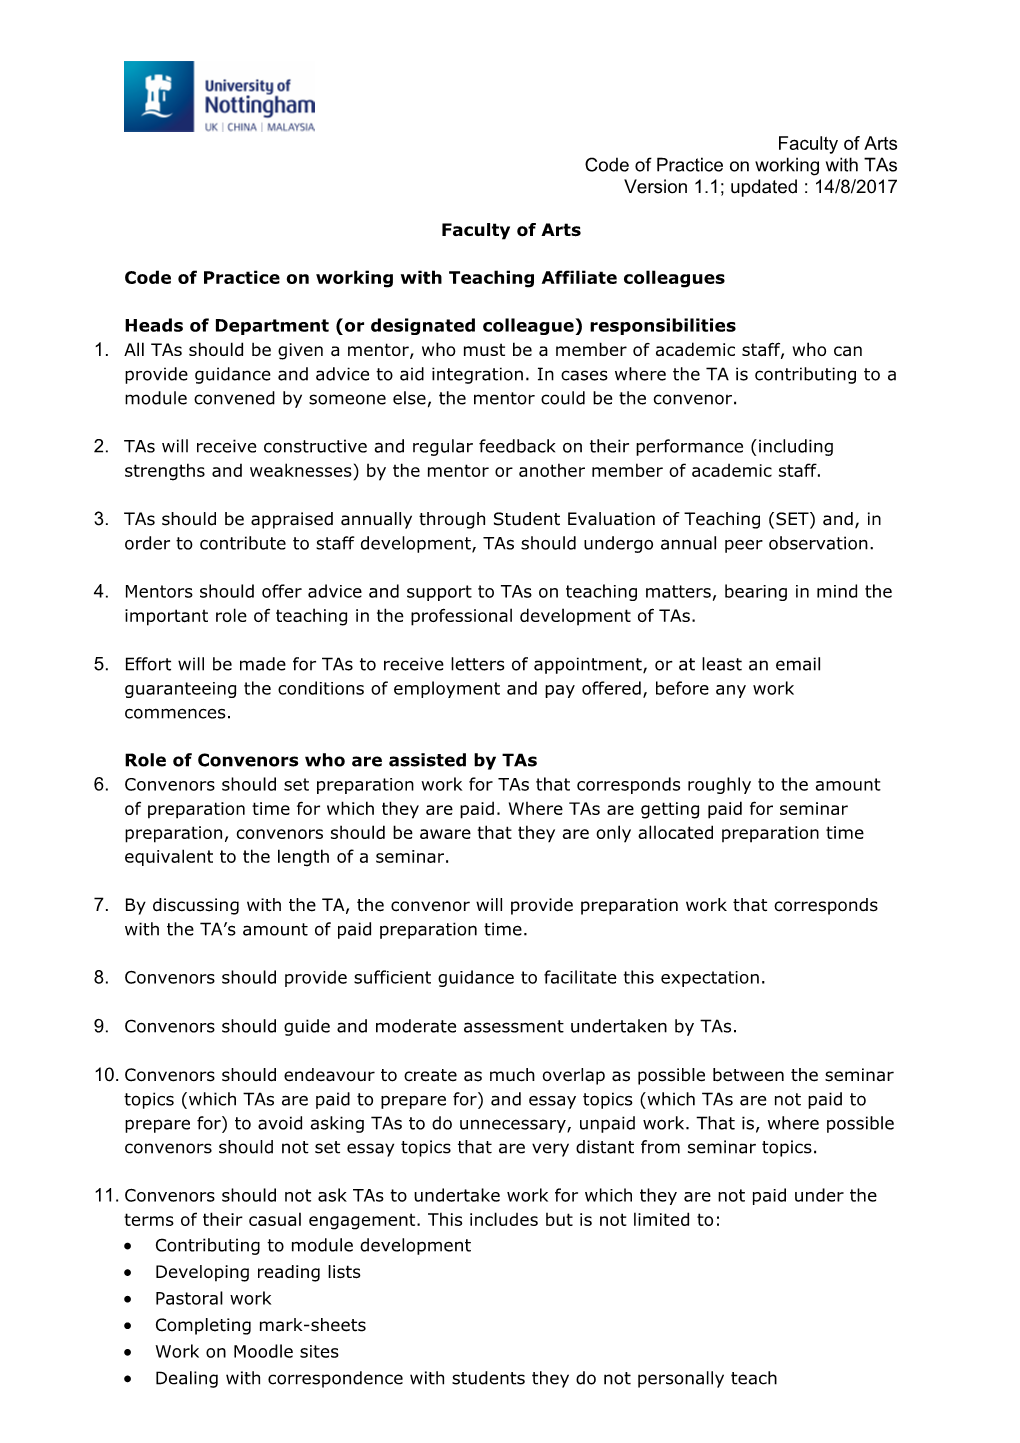 Code of Practice on Working with Teaching Affiliate Colleagues